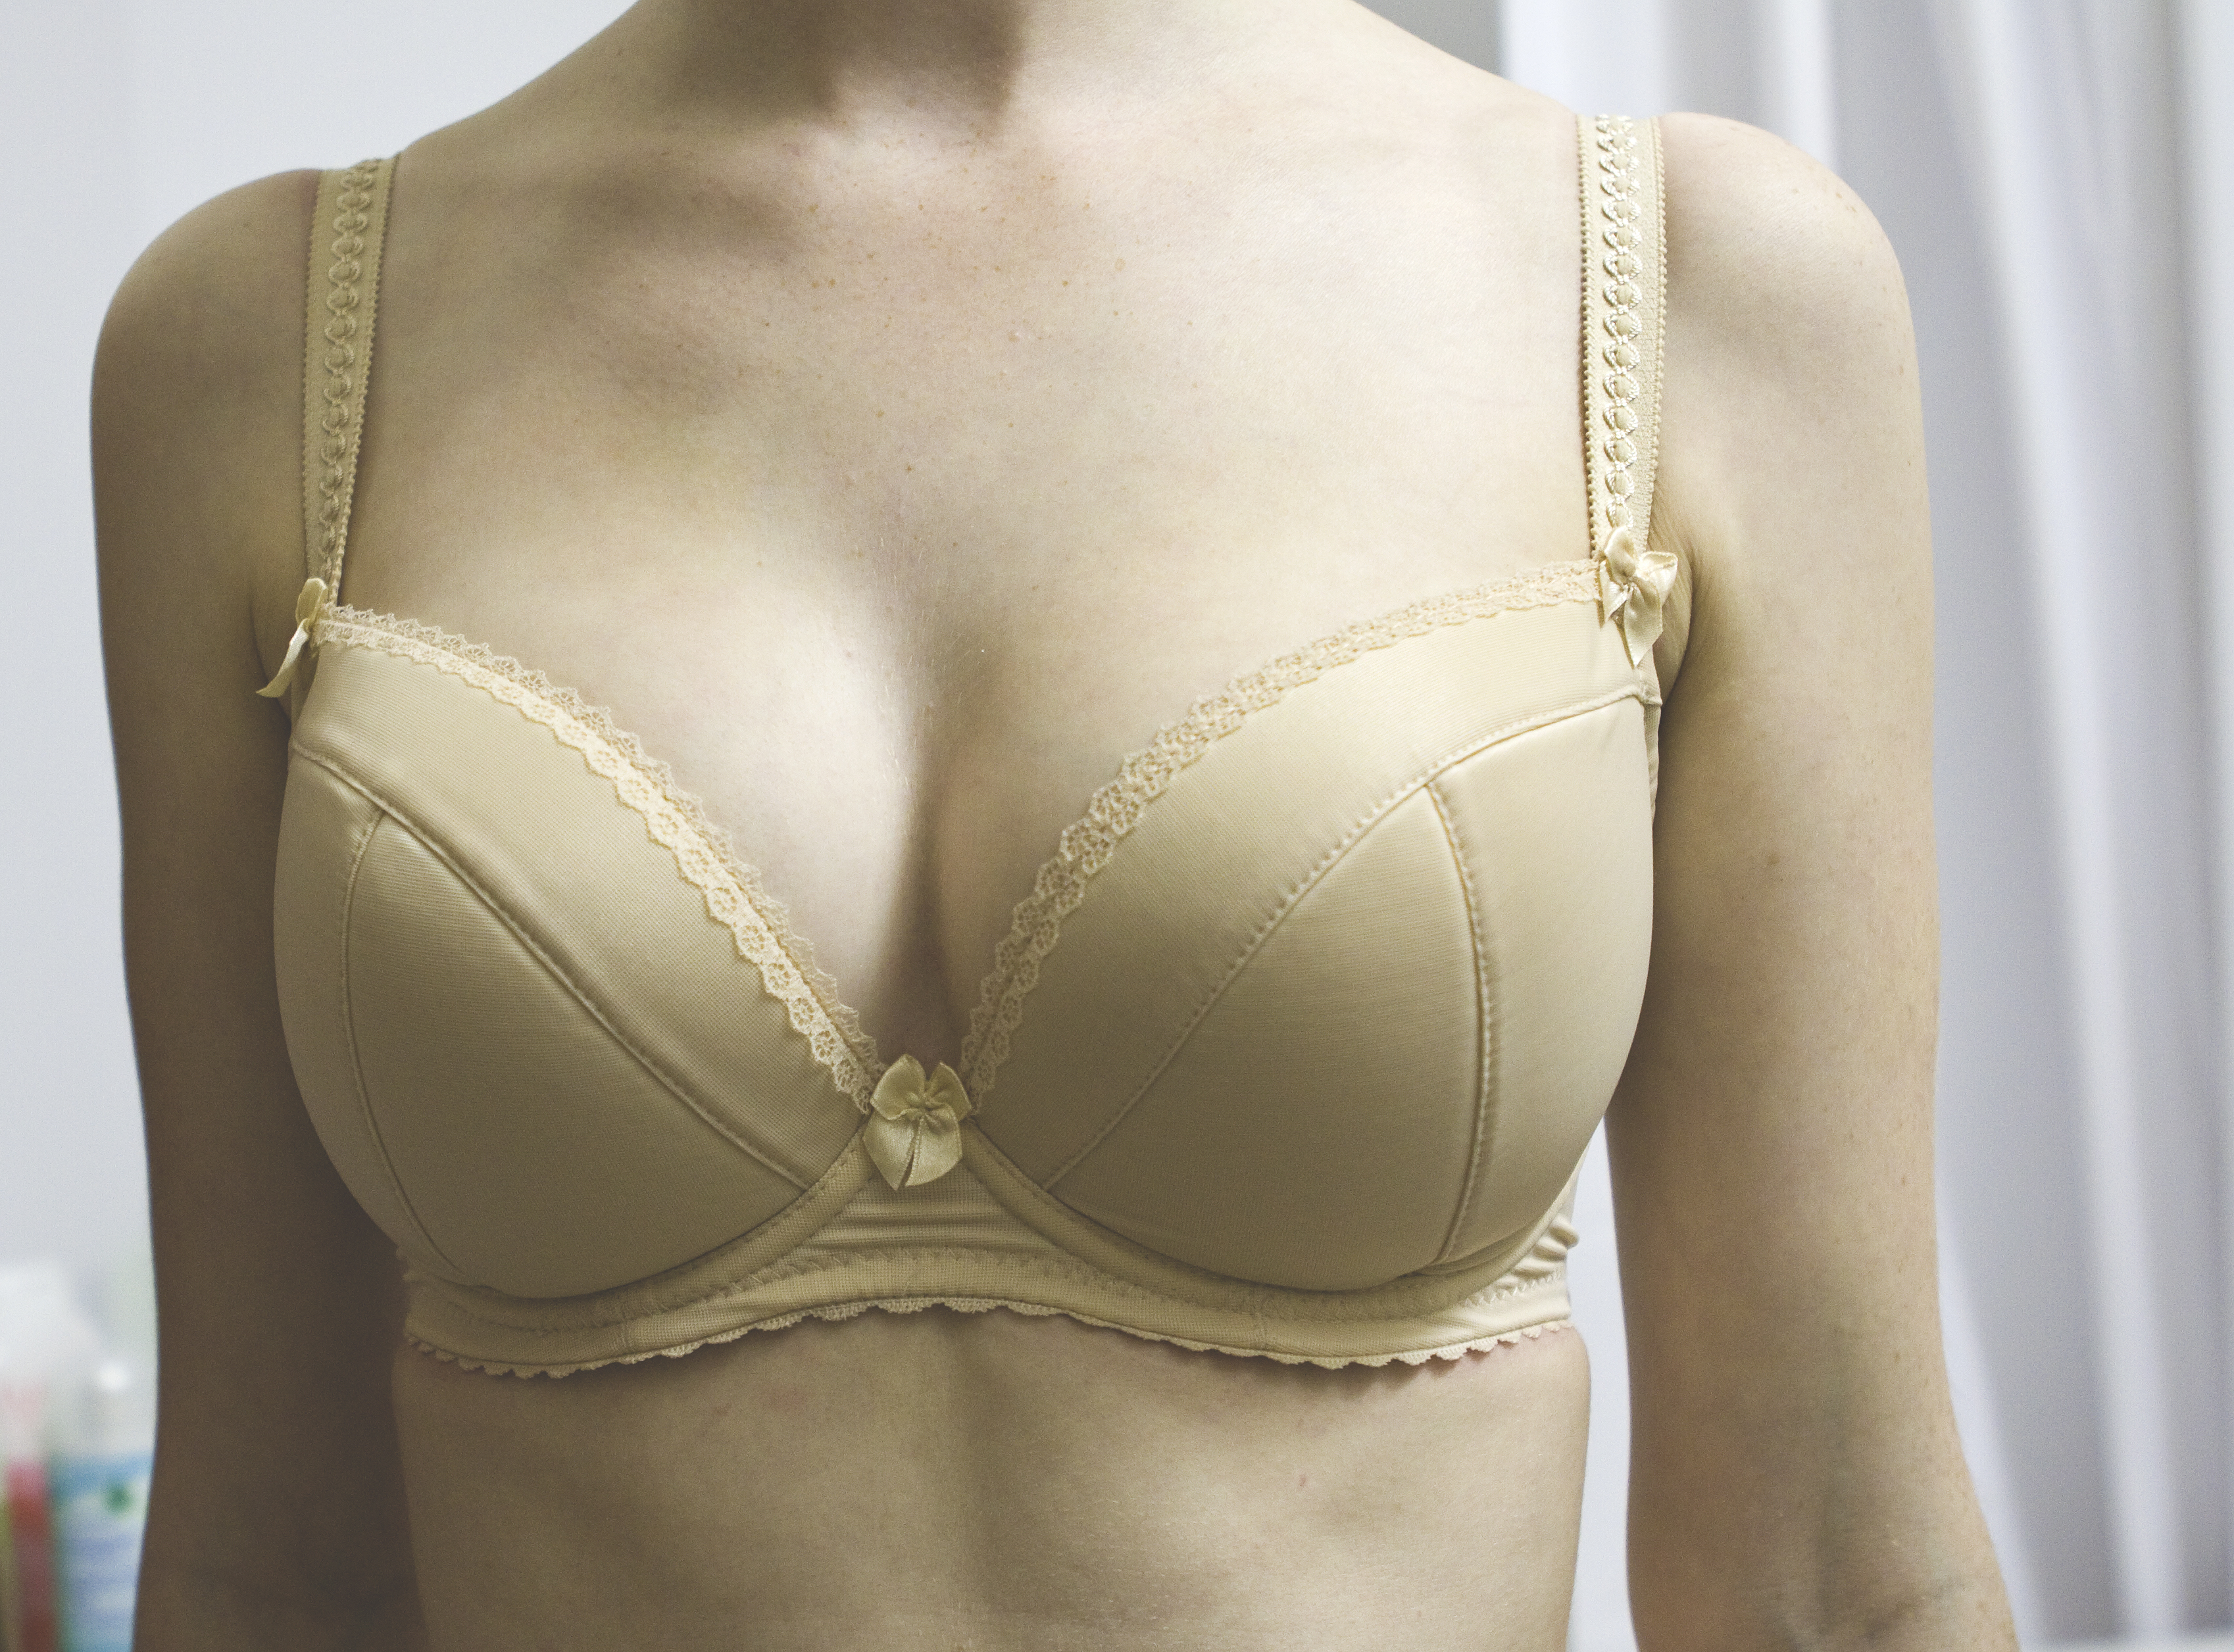 A Guide to Ewa Michalak's Bra Styles, Names and Sizes - Big Cup Little Cup